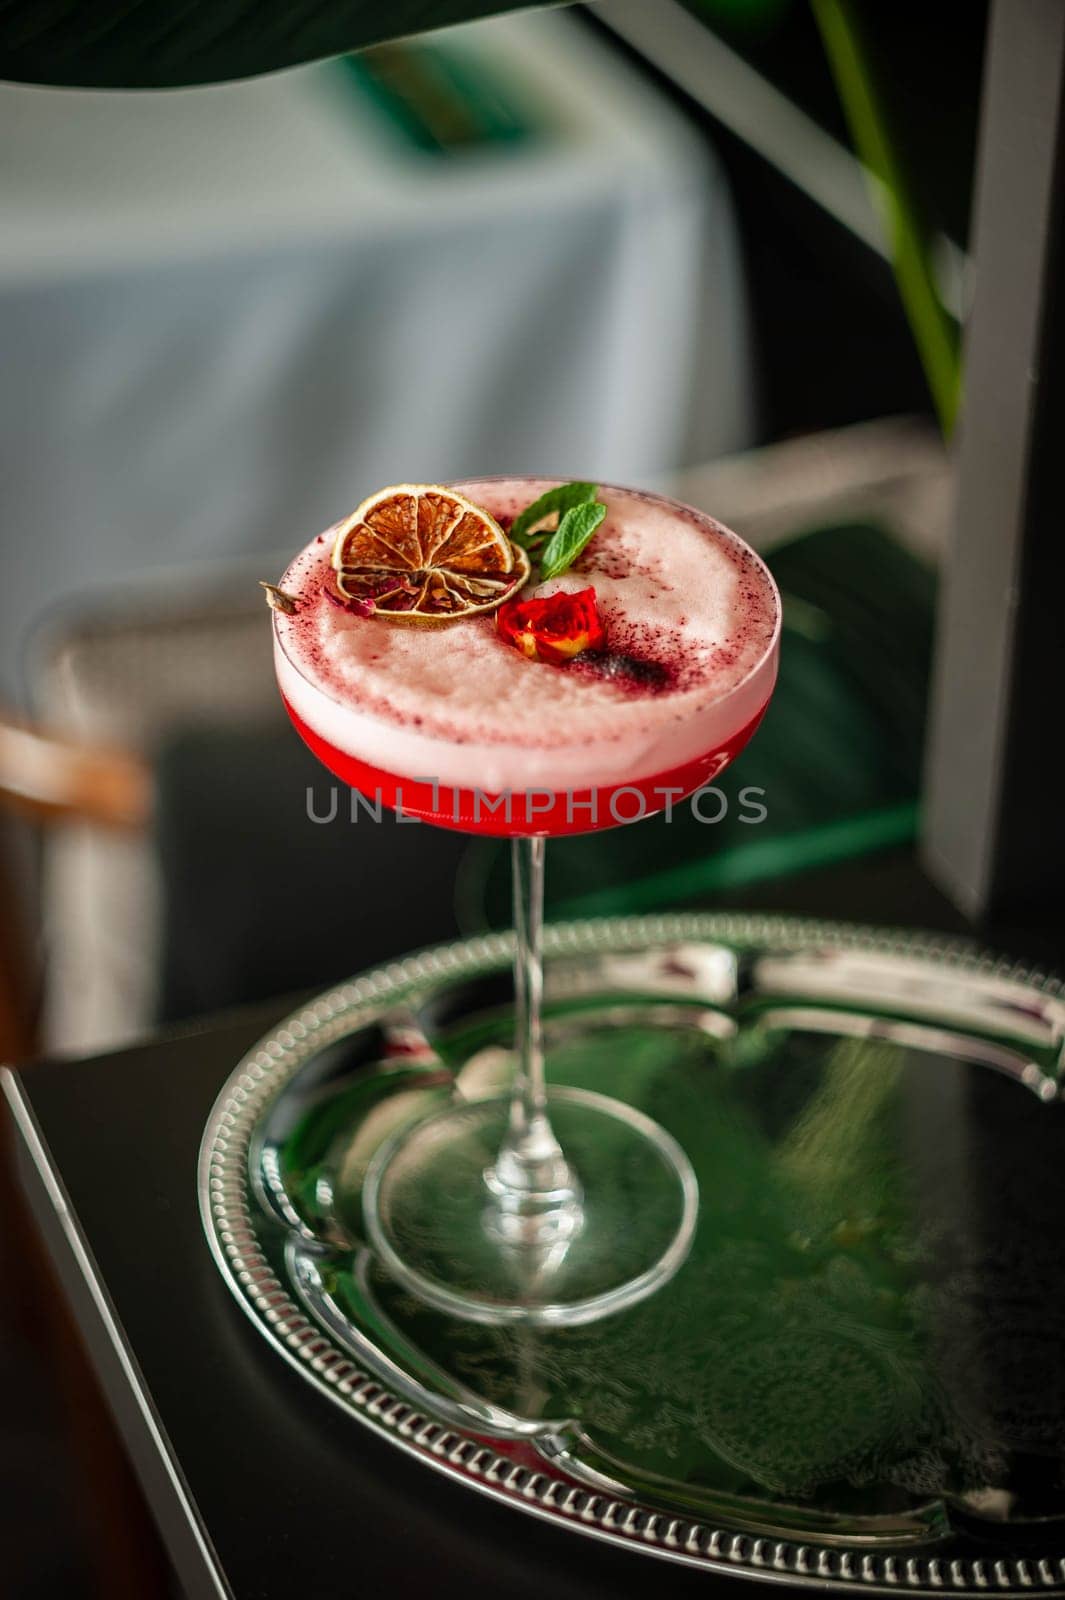 Pink lady alcoholic cocktail drink with gin, grenadine syrup, lemon juice and egg white, dark background. High quality photo